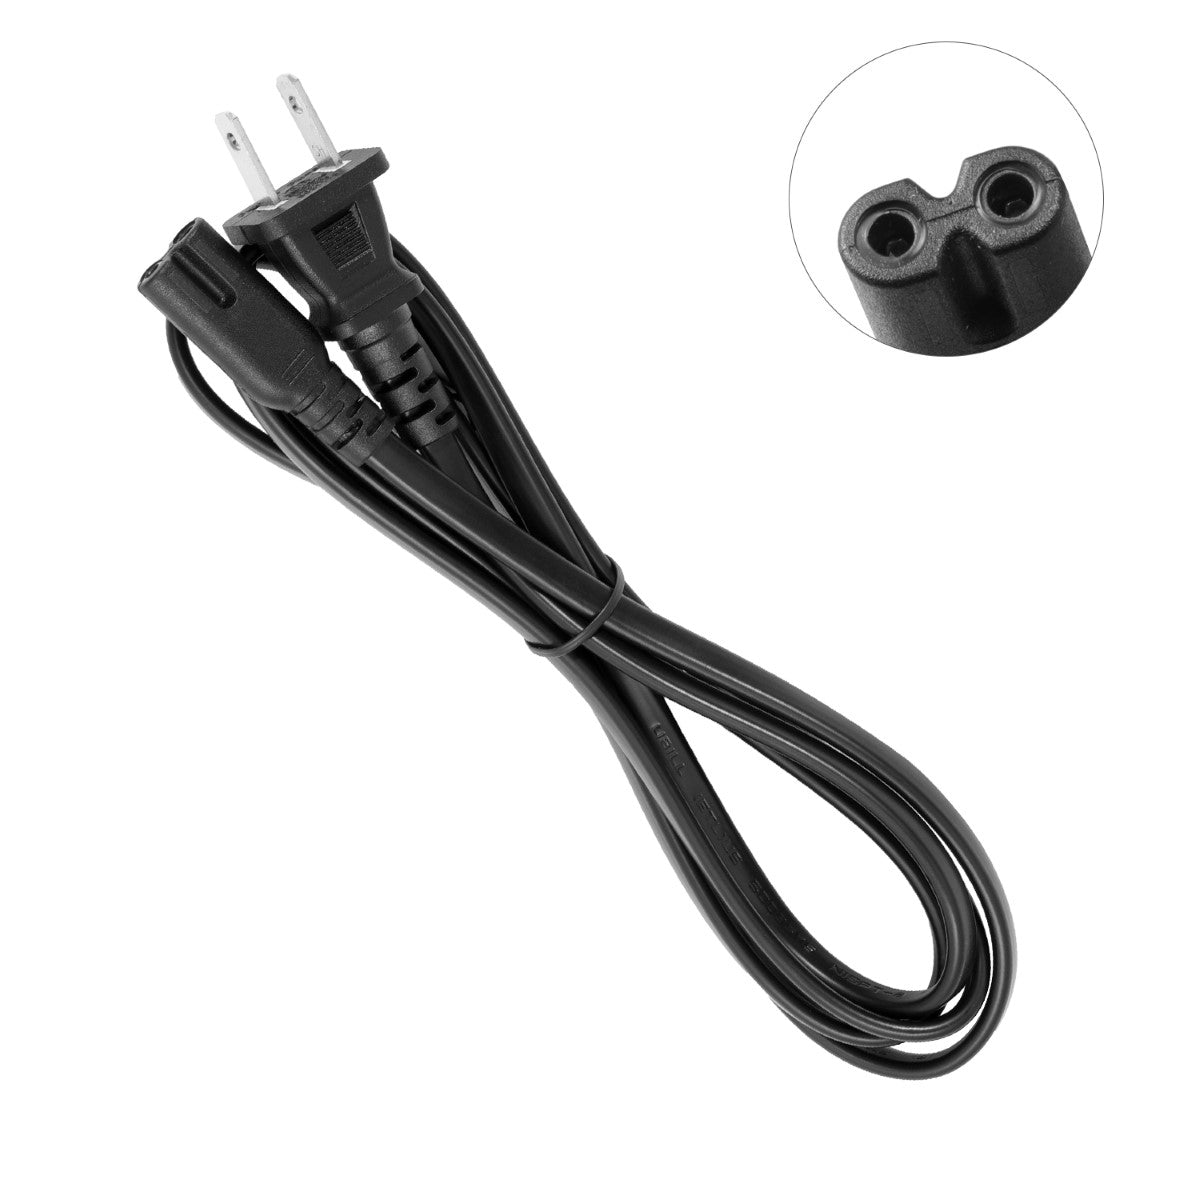 Power Cord for HP ENVY 100 D410a e-All-in-One Printer.